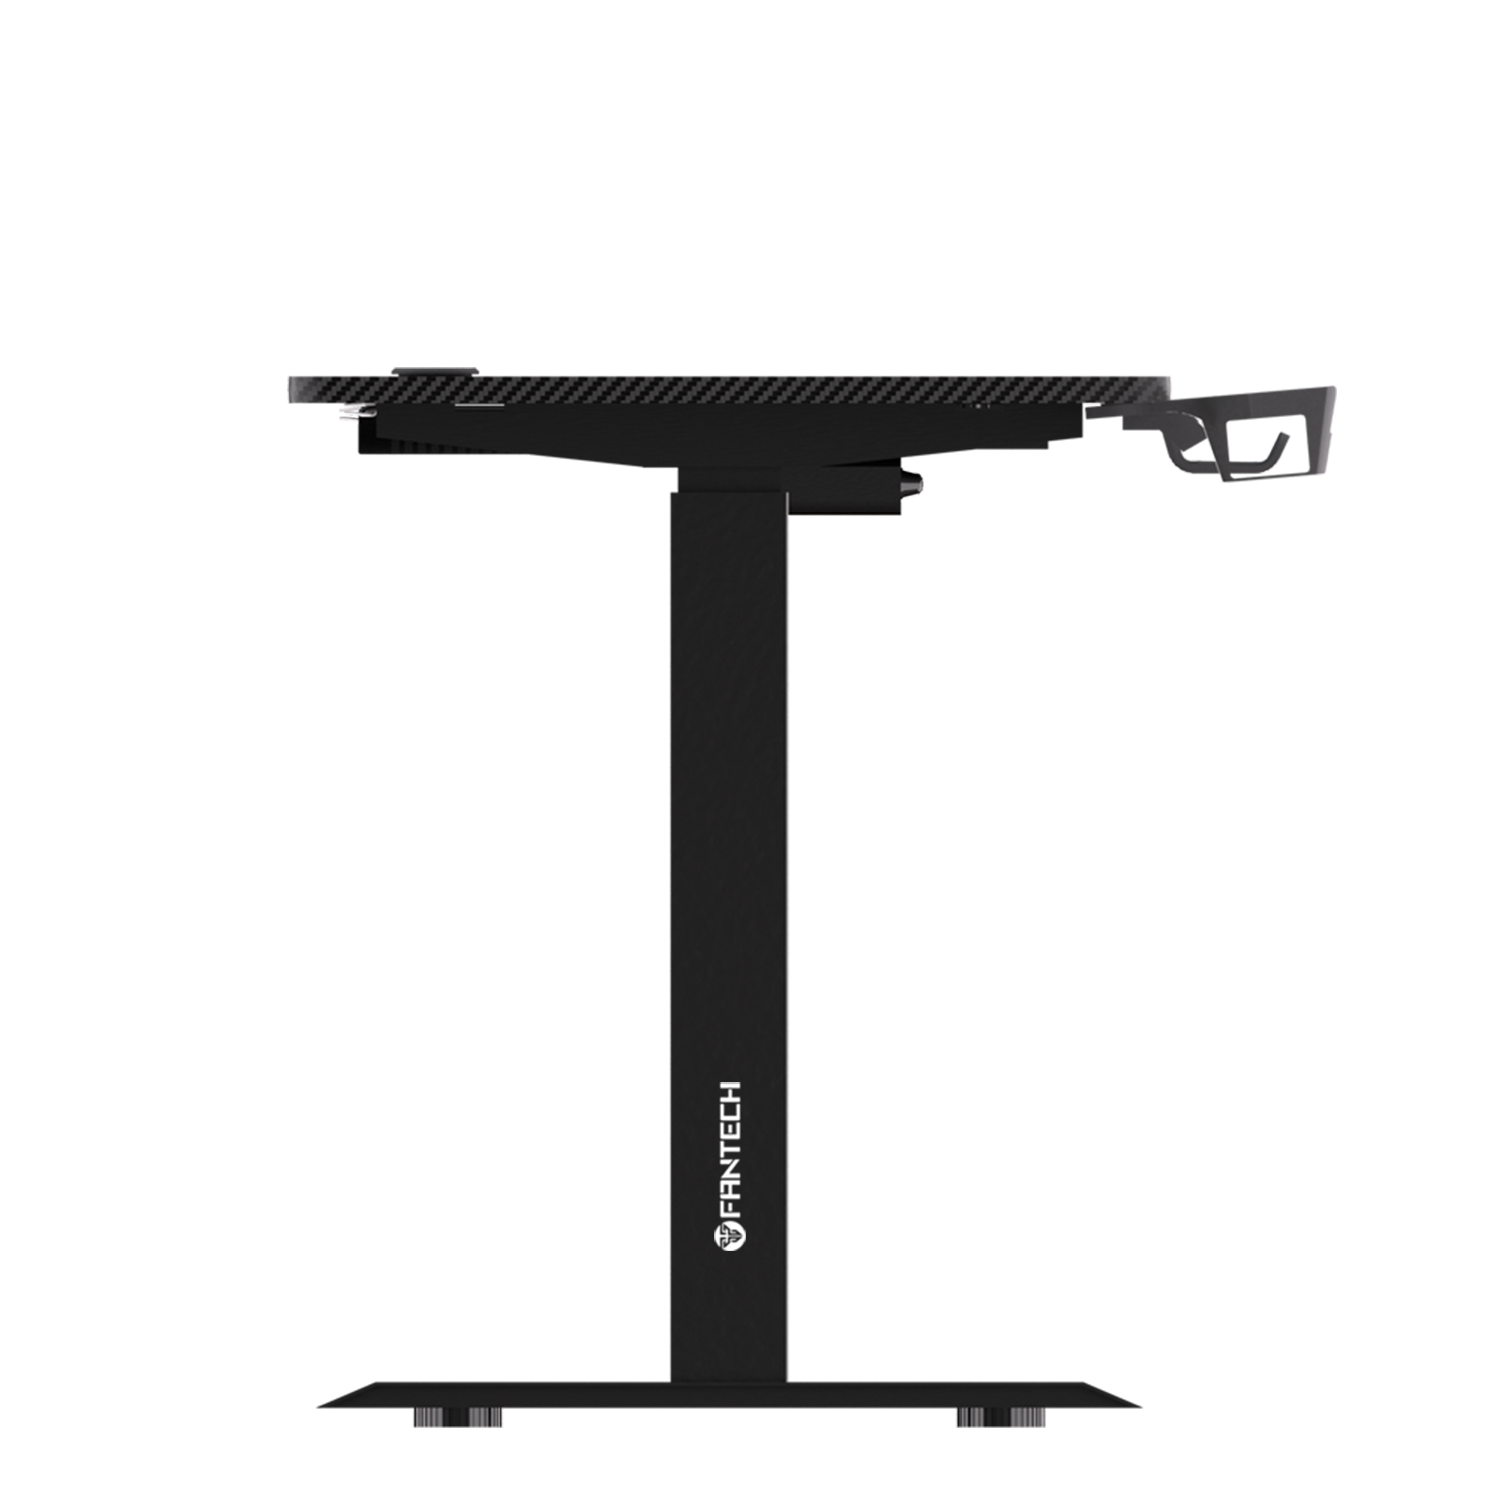 Fantech GD914 Office Desk Height Adjustable Motorised Electric Stand Gaming Table 140x60cm(Black)